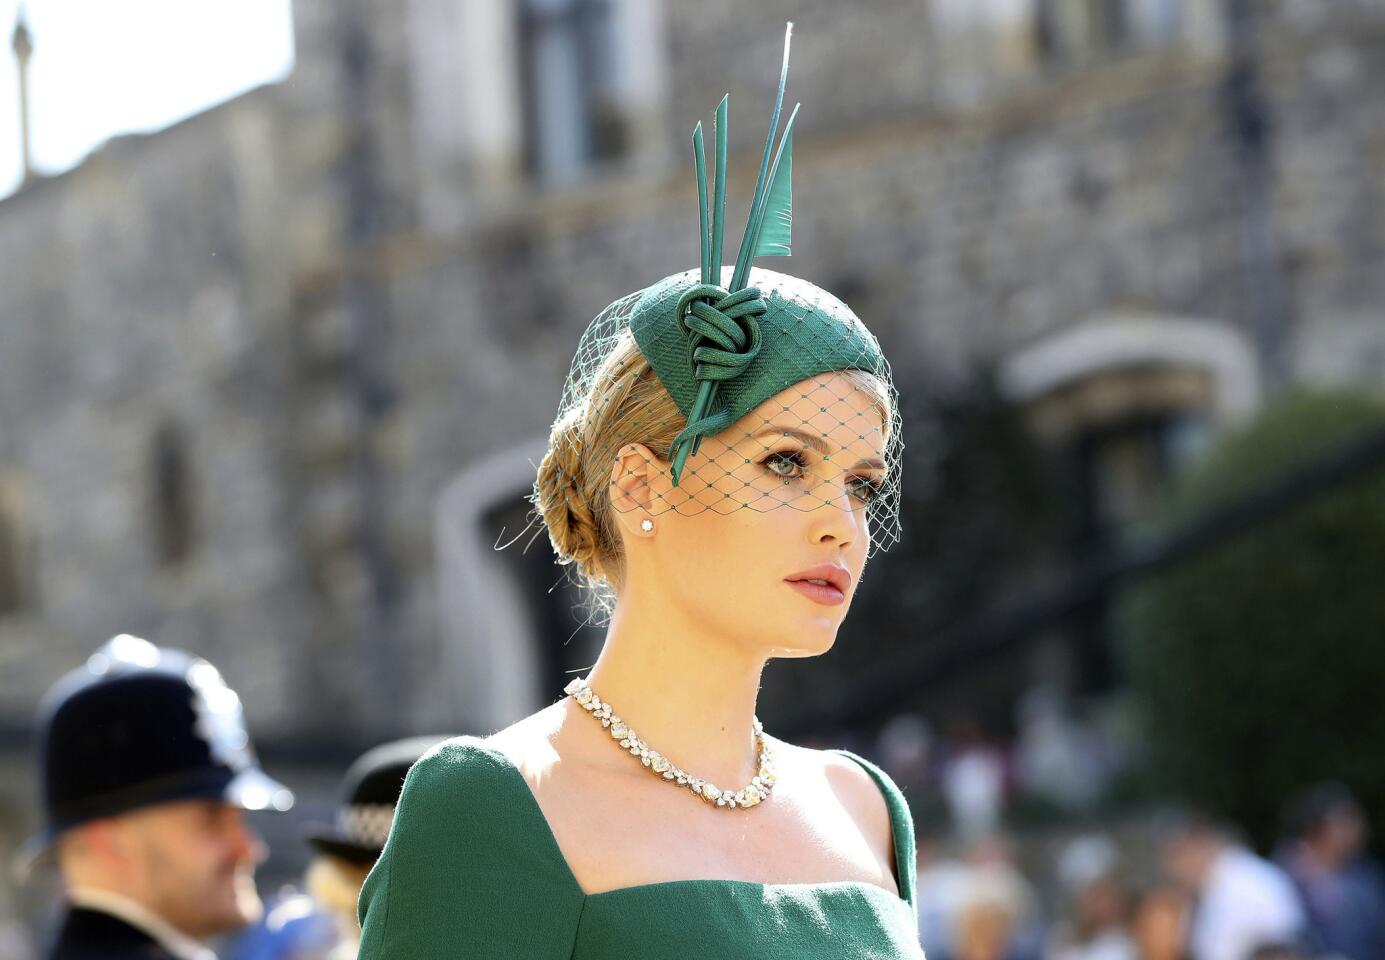 Lady Kitty Spencer arrives for the wedding of Prince Harry and Meghan Markle at St. George's Chapel in Windsor Castle on May 19, 2018.